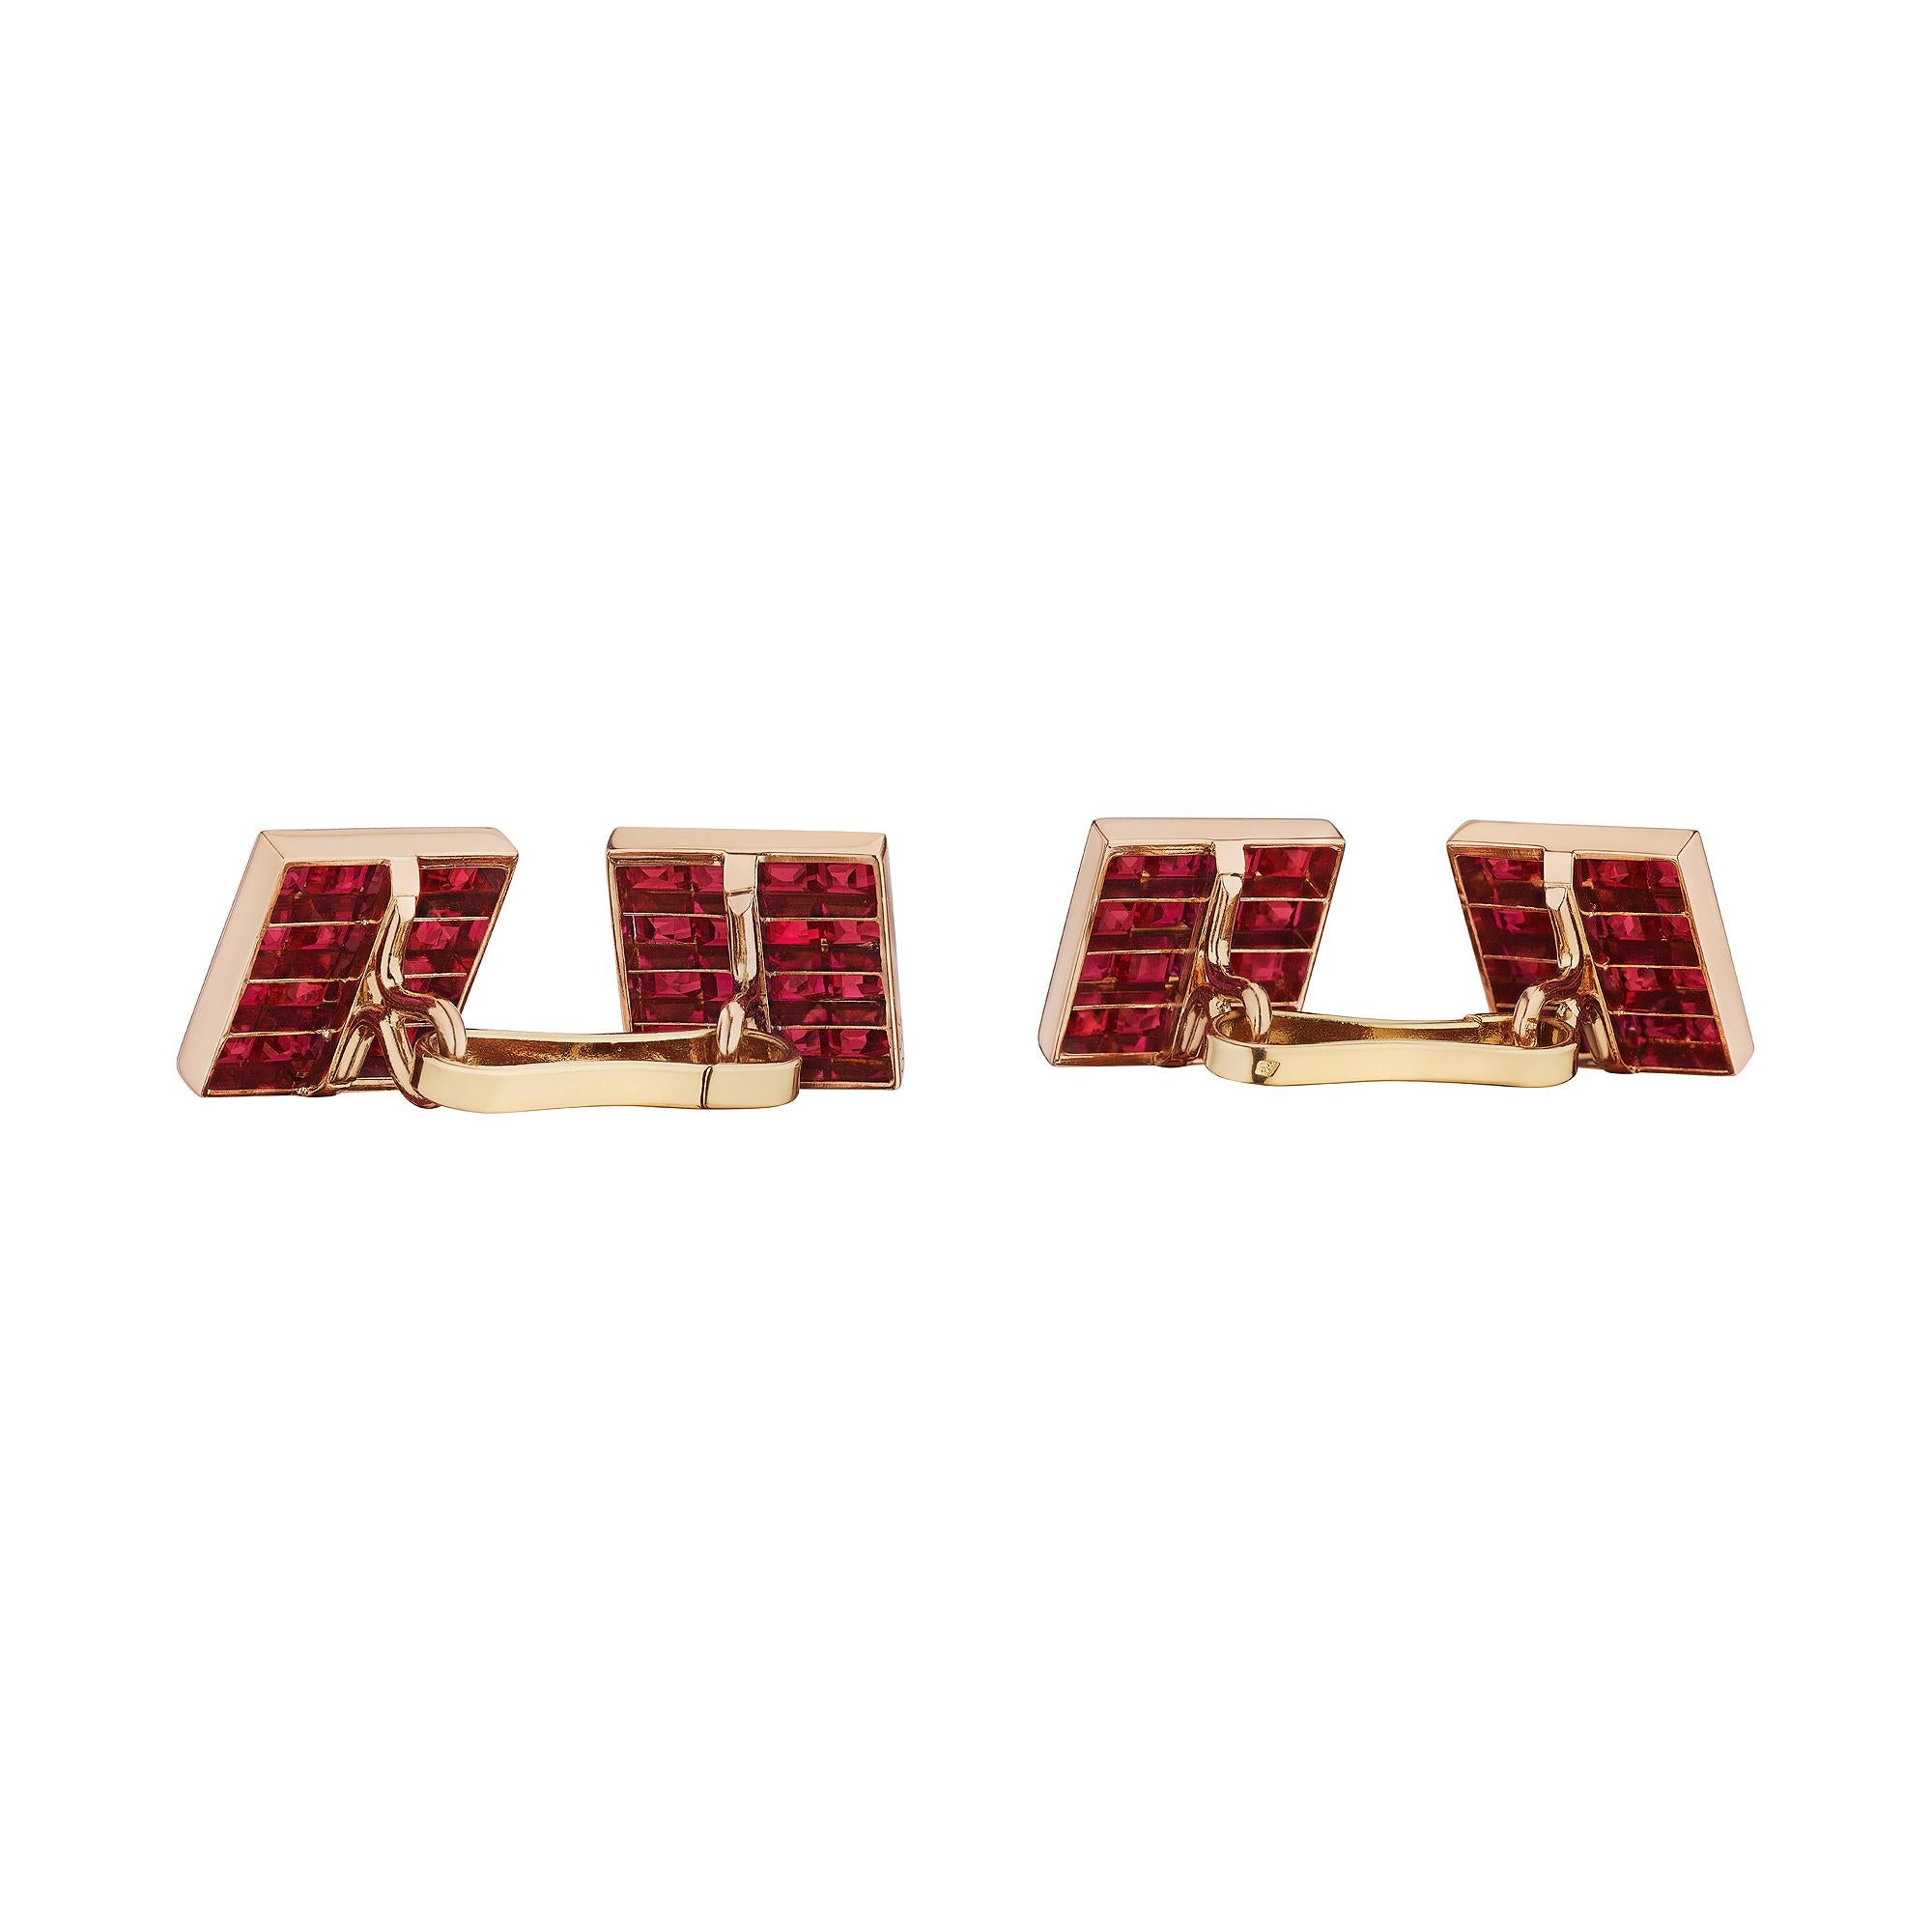 The ultimate in grace and sophistication, these Van Cleef & Arpels Paris modernist invisibly set square cut ruby rose gold cufflinks are simply immersive.  This stunning pair of cufflinks contains 64 square cut invisibly set vivid red rubies,